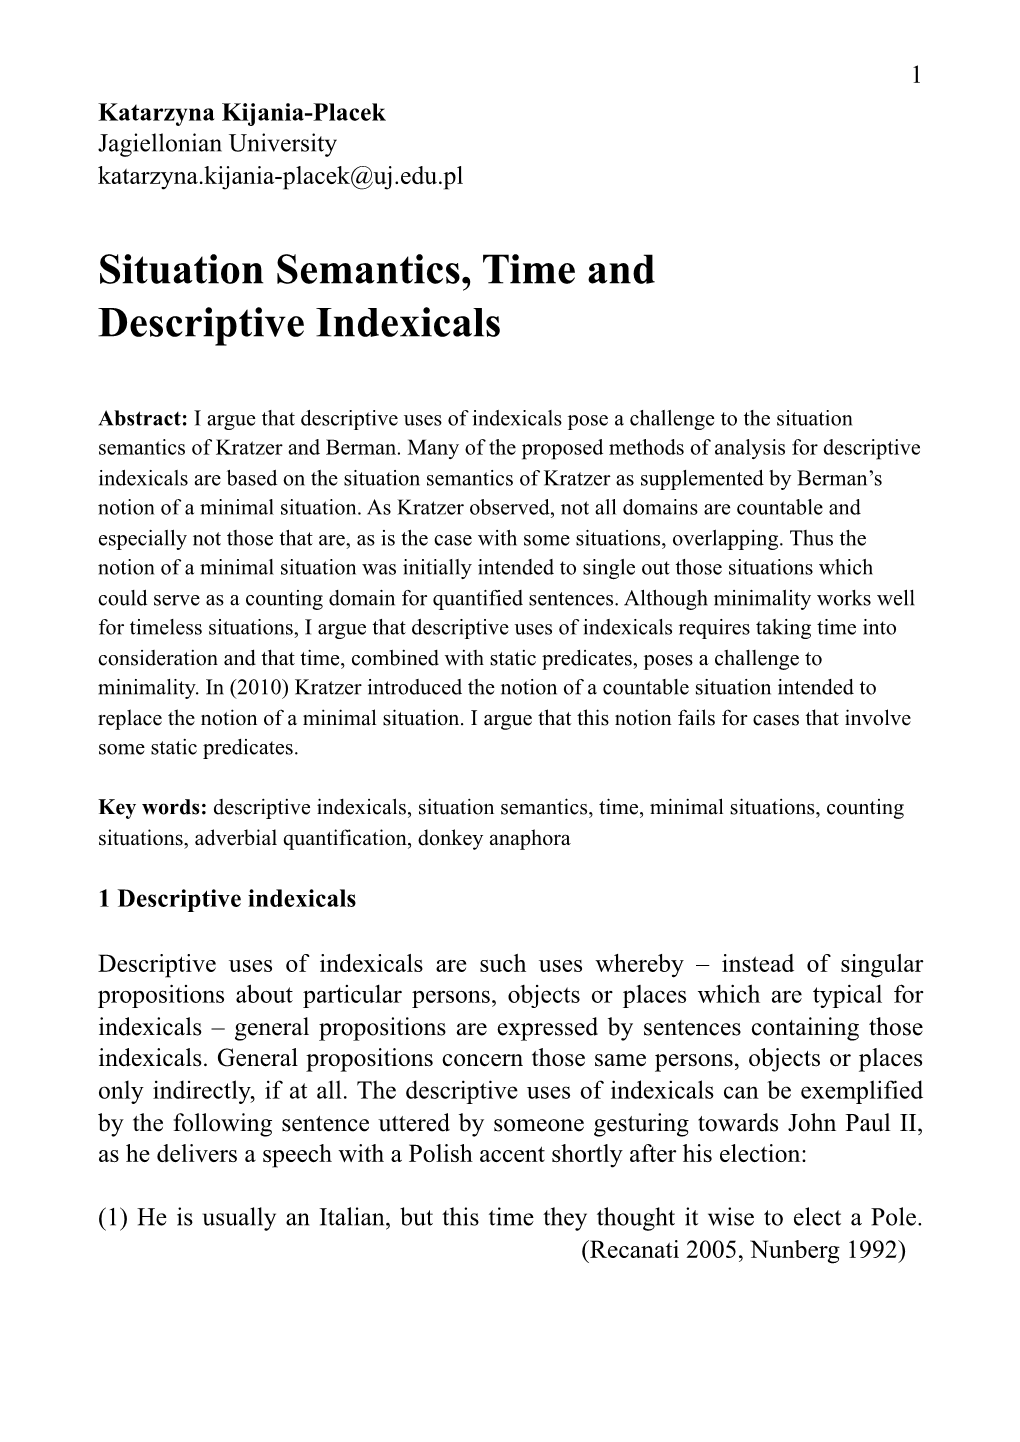 Situation Semantics, Time and Descriptive Indexicals